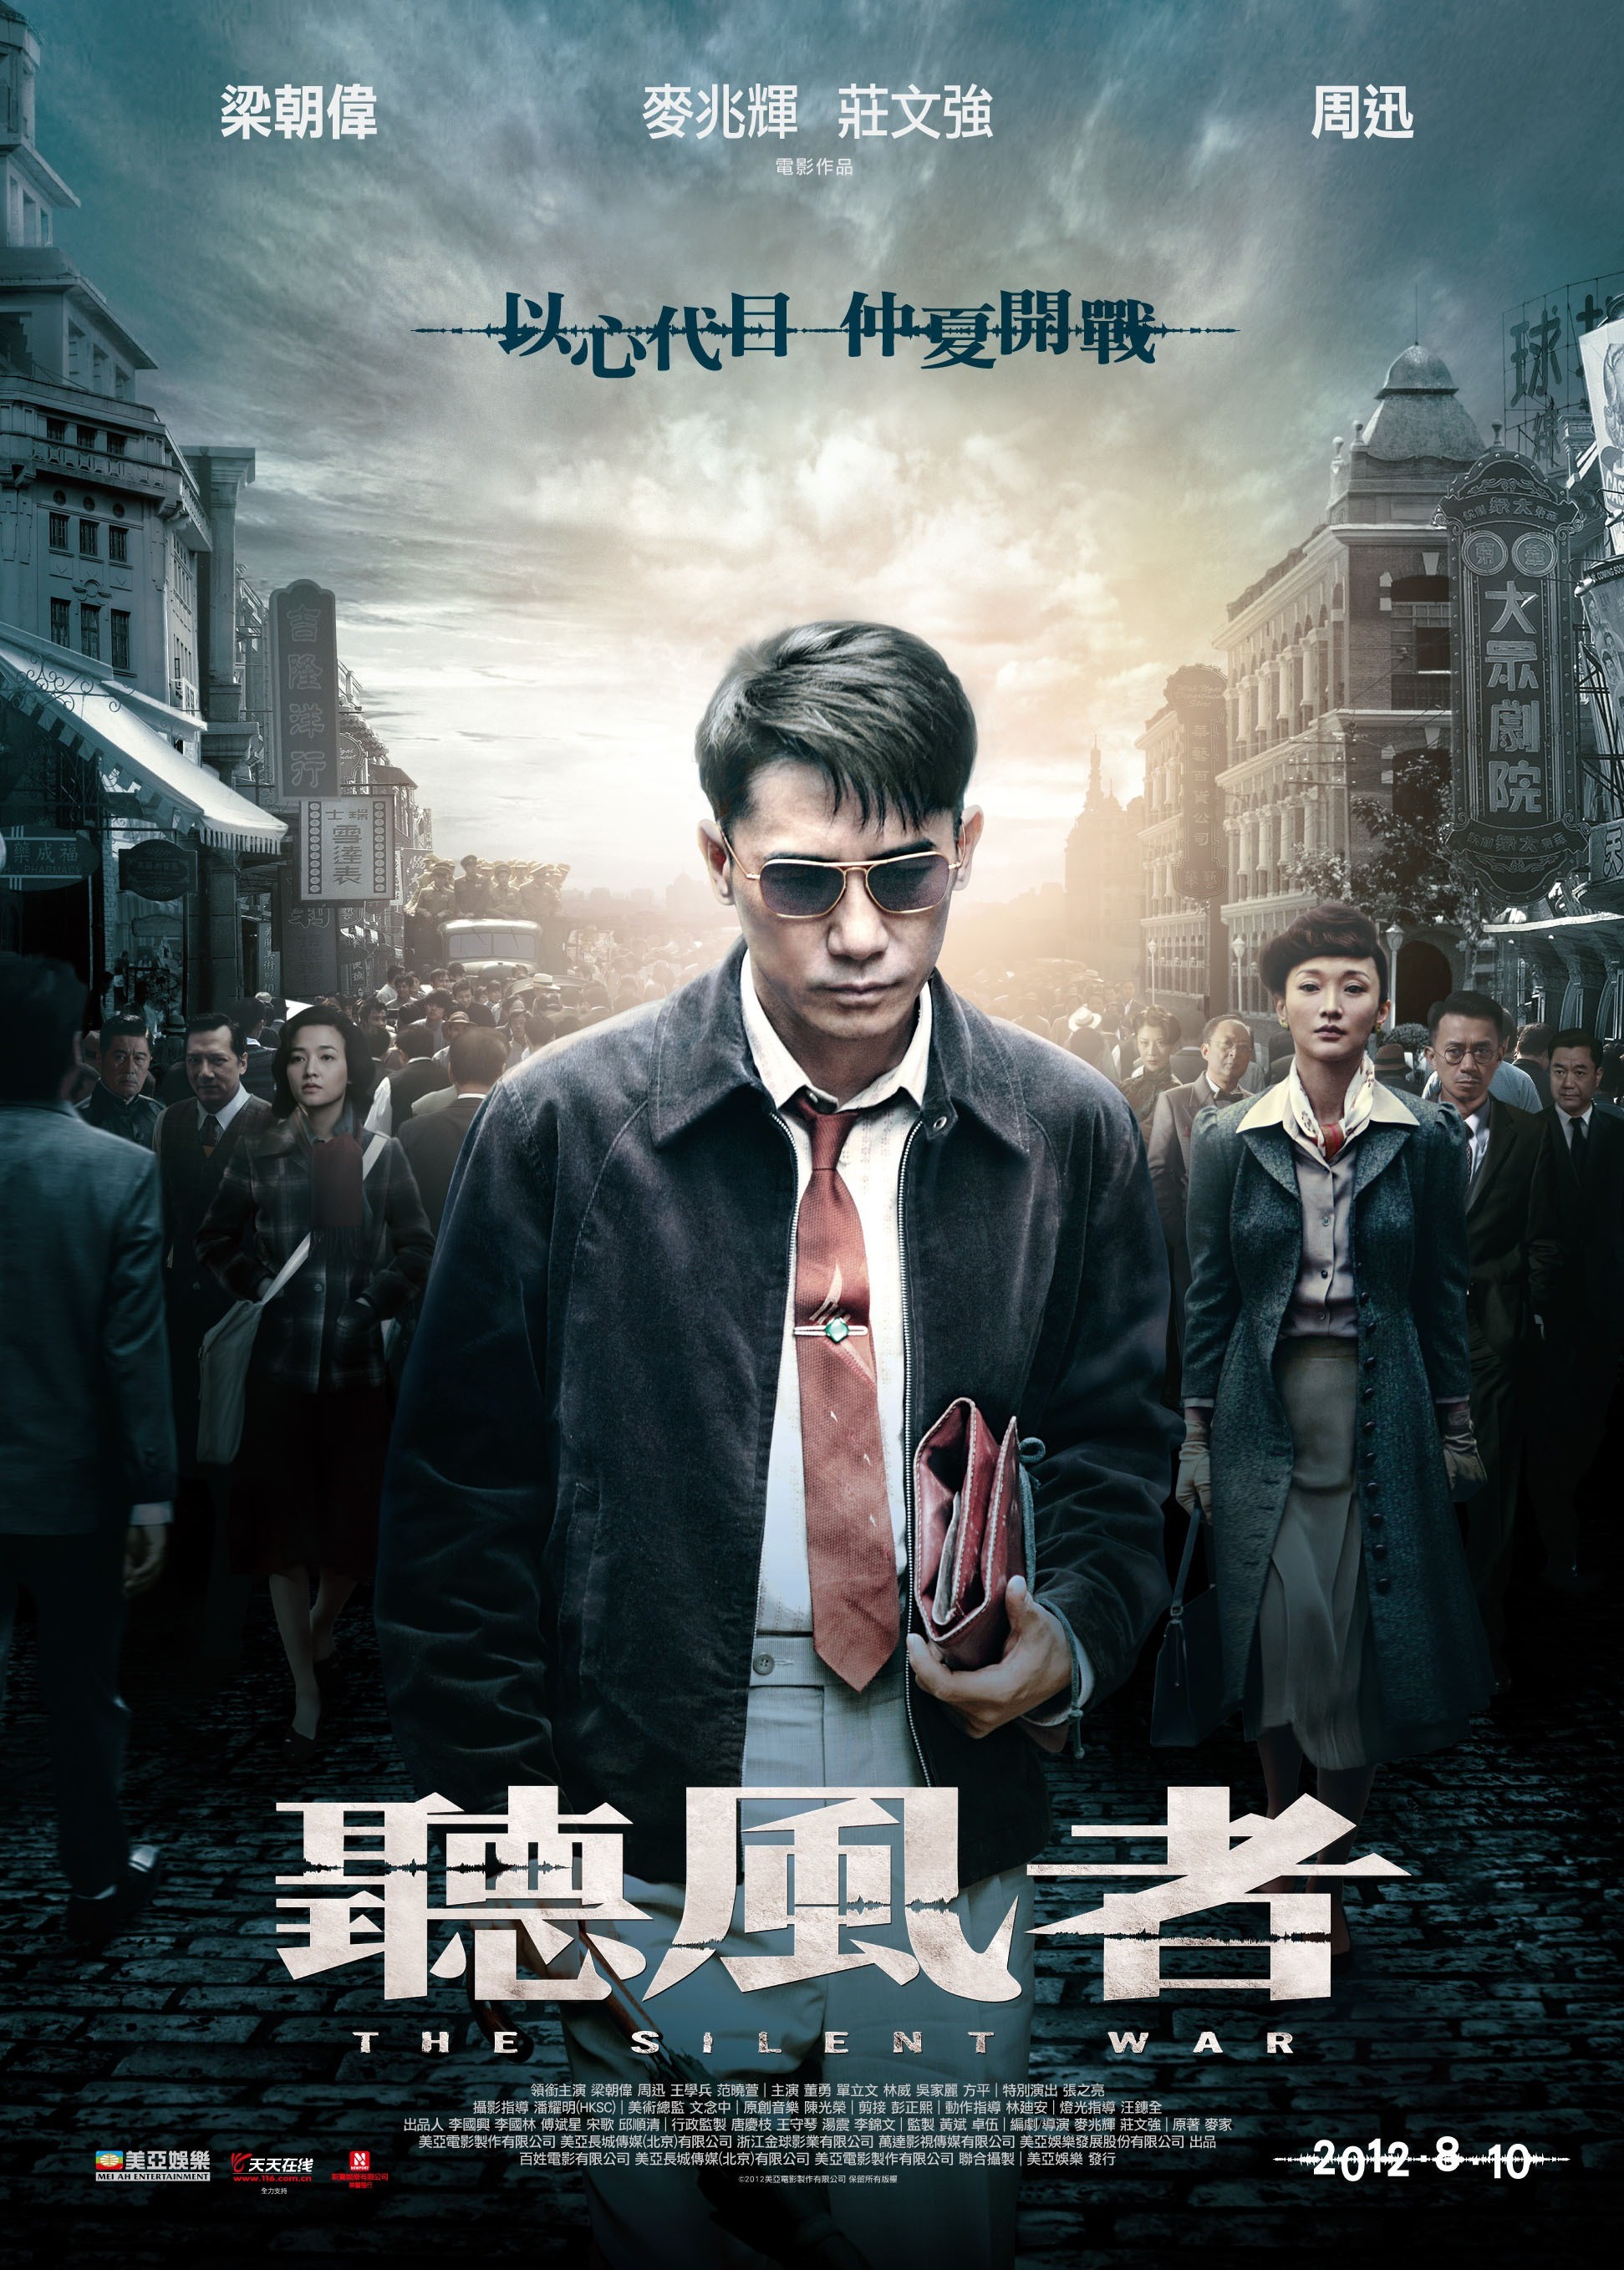 Mega Sized Movie Poster Image for Ting feng zhe (#1 of 9)